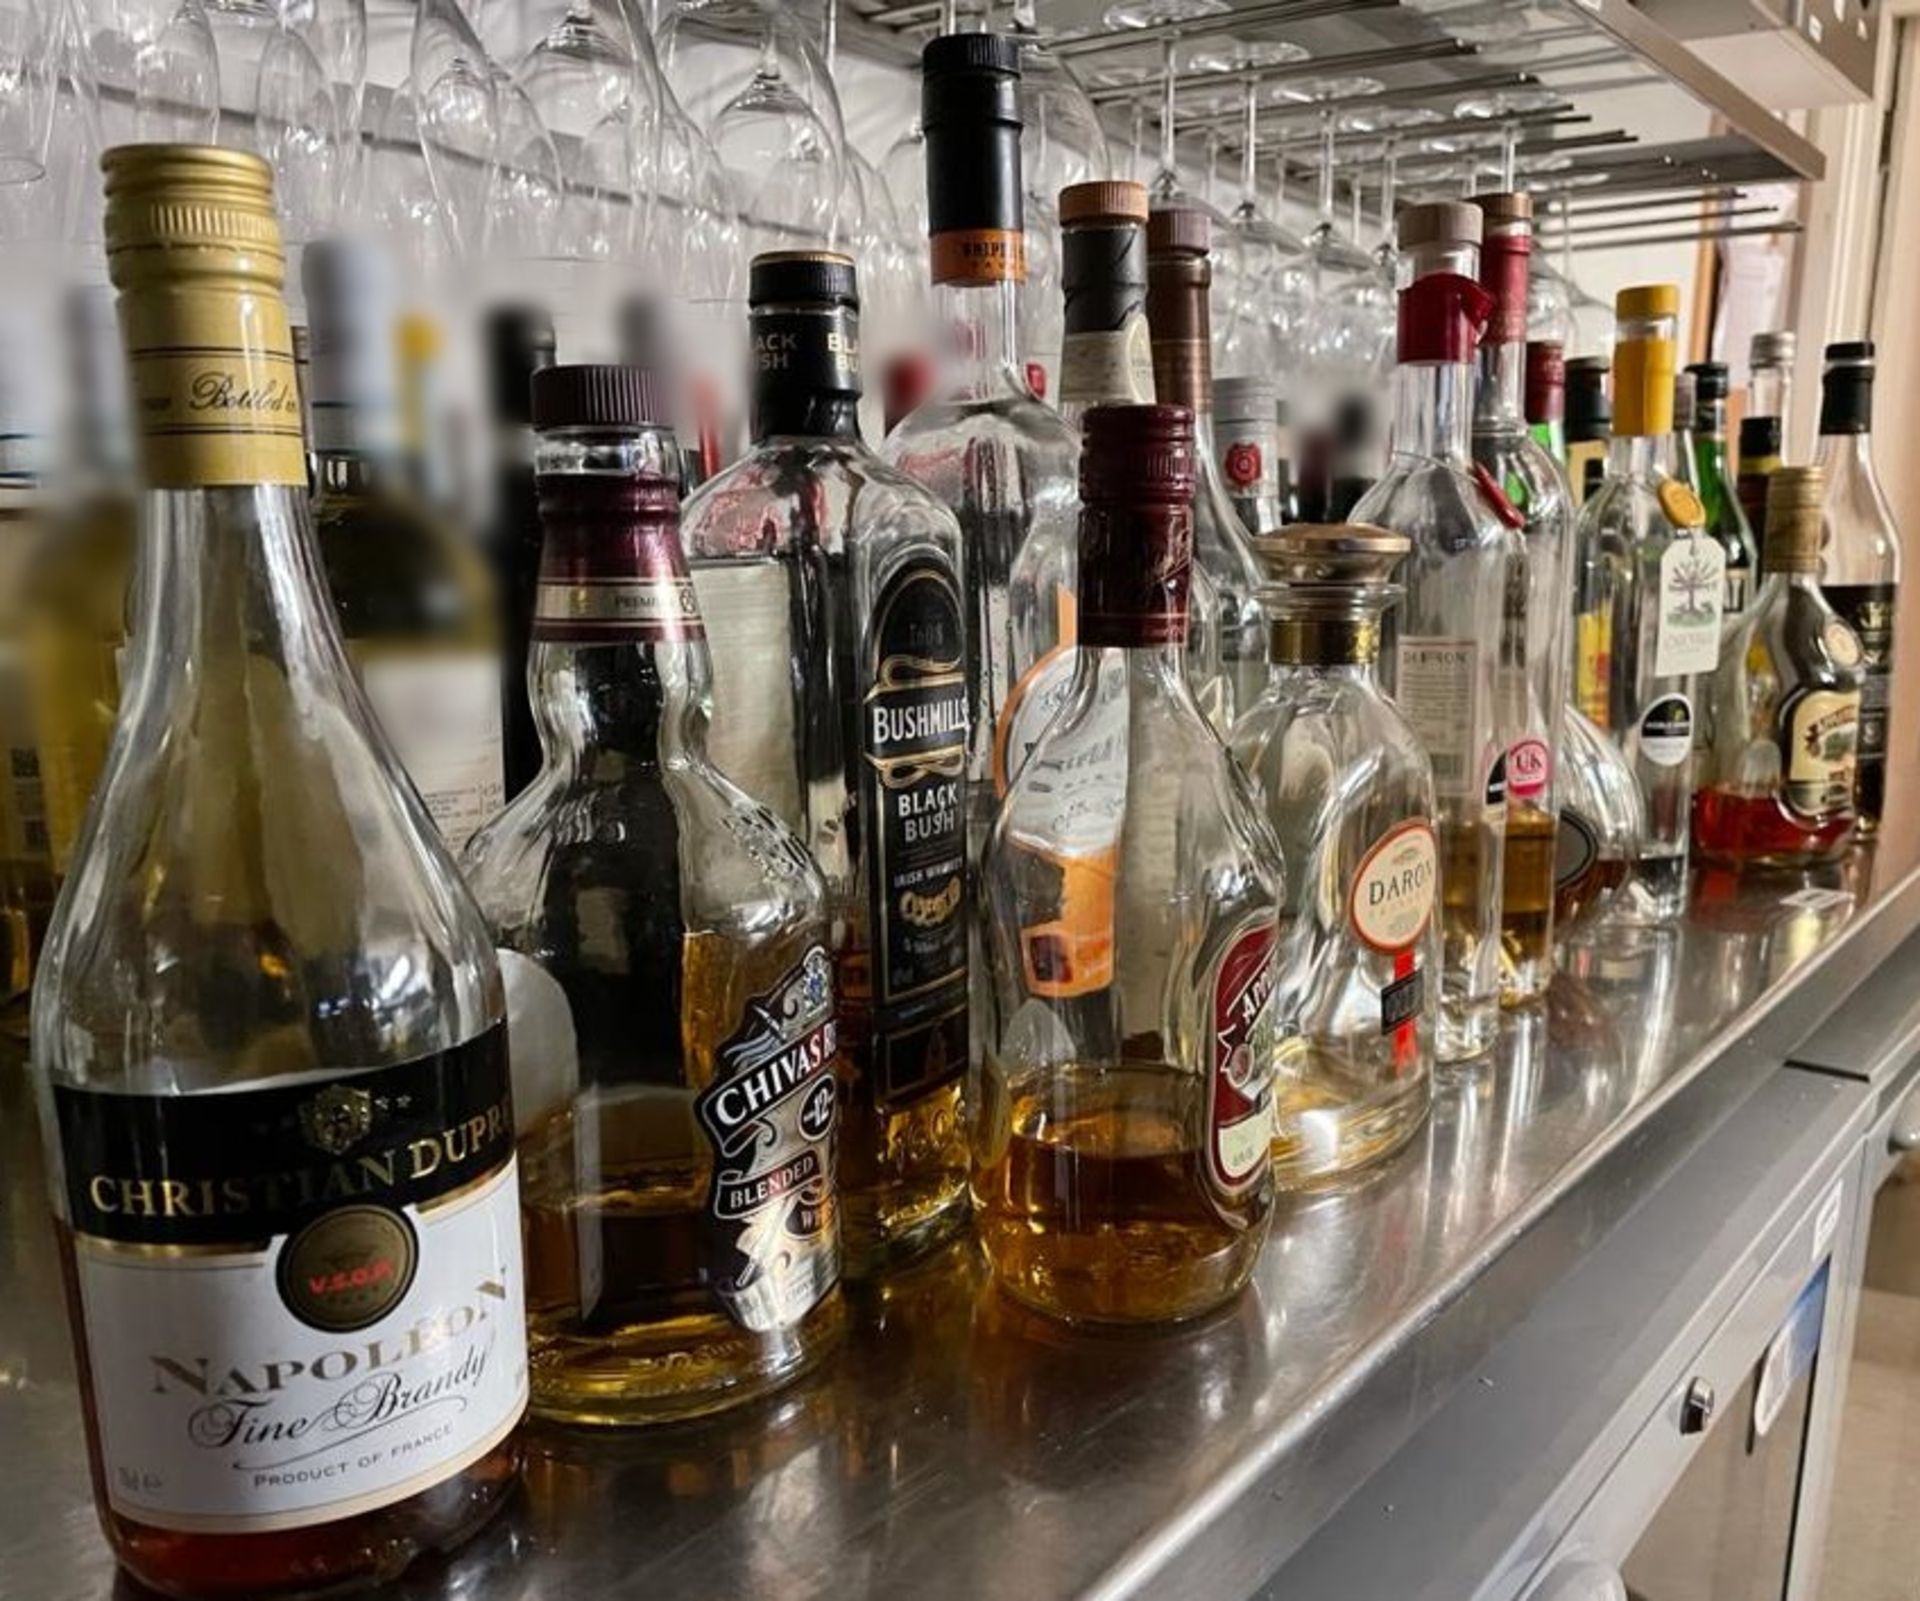 25 x Assorted Bottles Of Open Spirits And Liquers - Selection As Shown - Restaurant Stock - Ref: